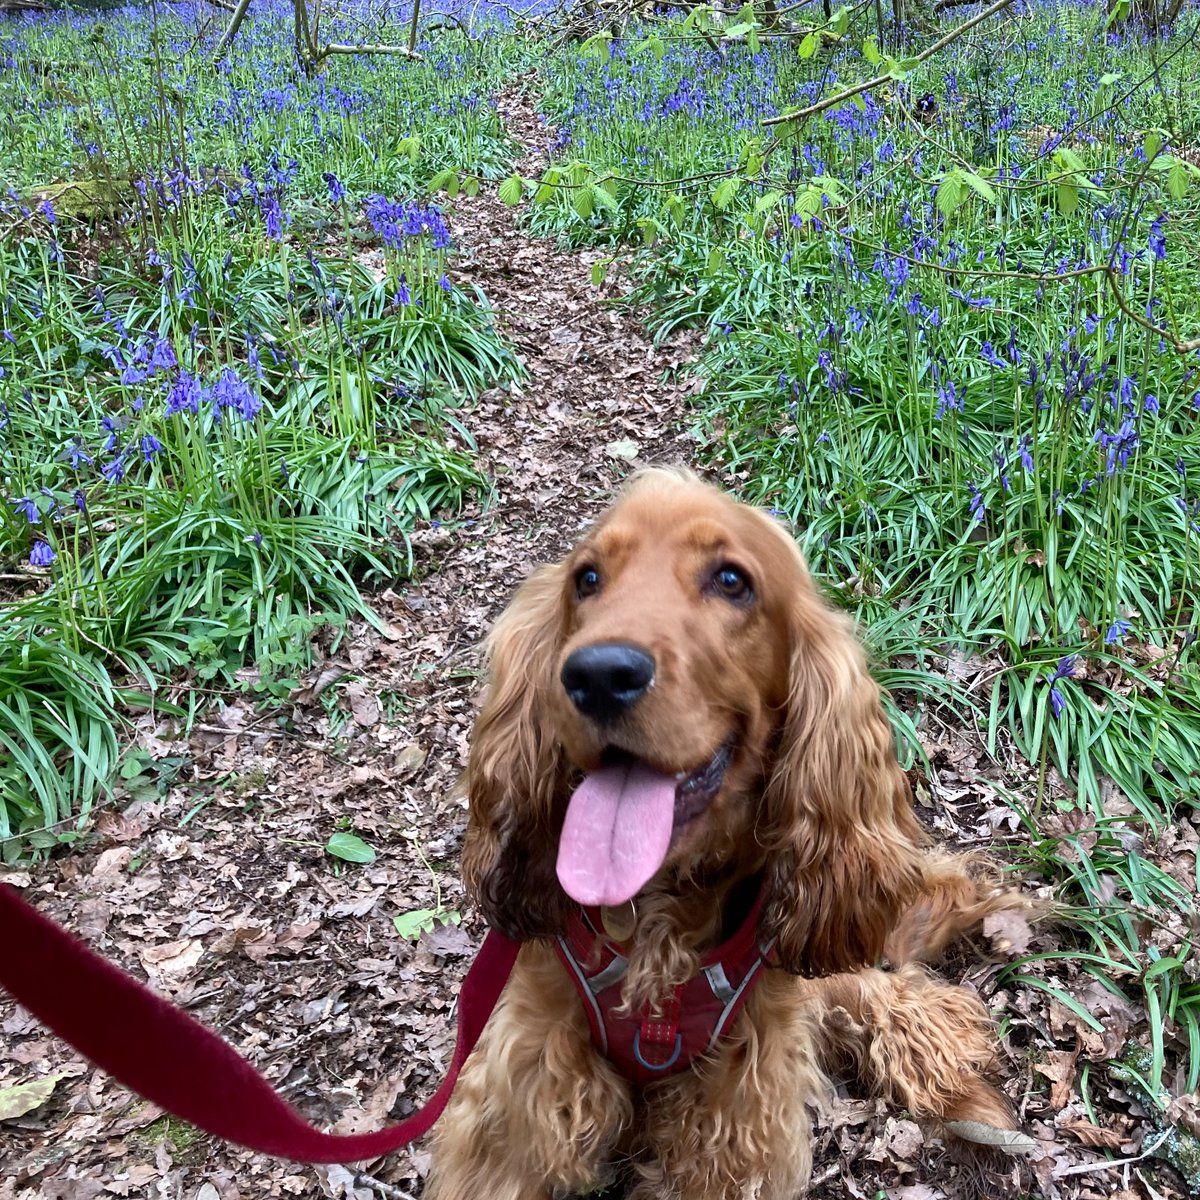 @MarvellousMrsP A happy pup in In bluebell woods